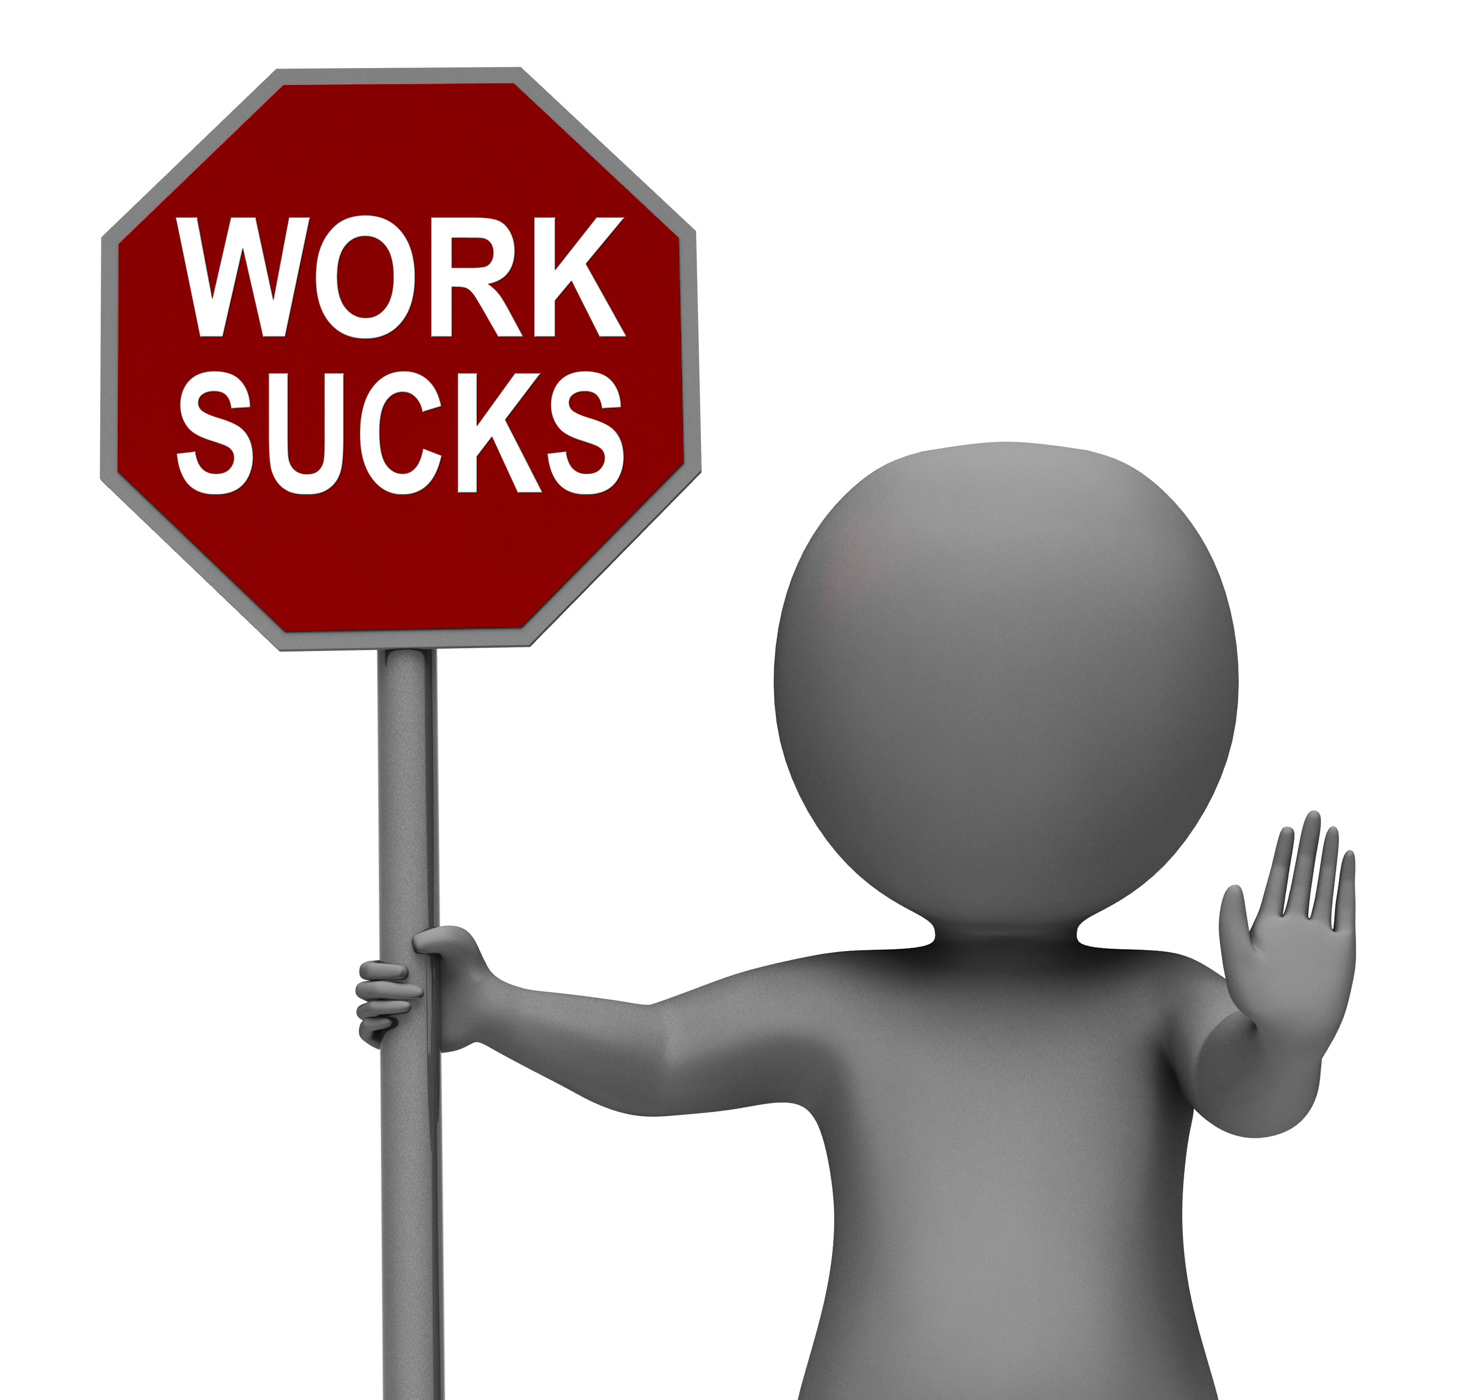 Work sucks stop sign shows stopping difficult working labour photo